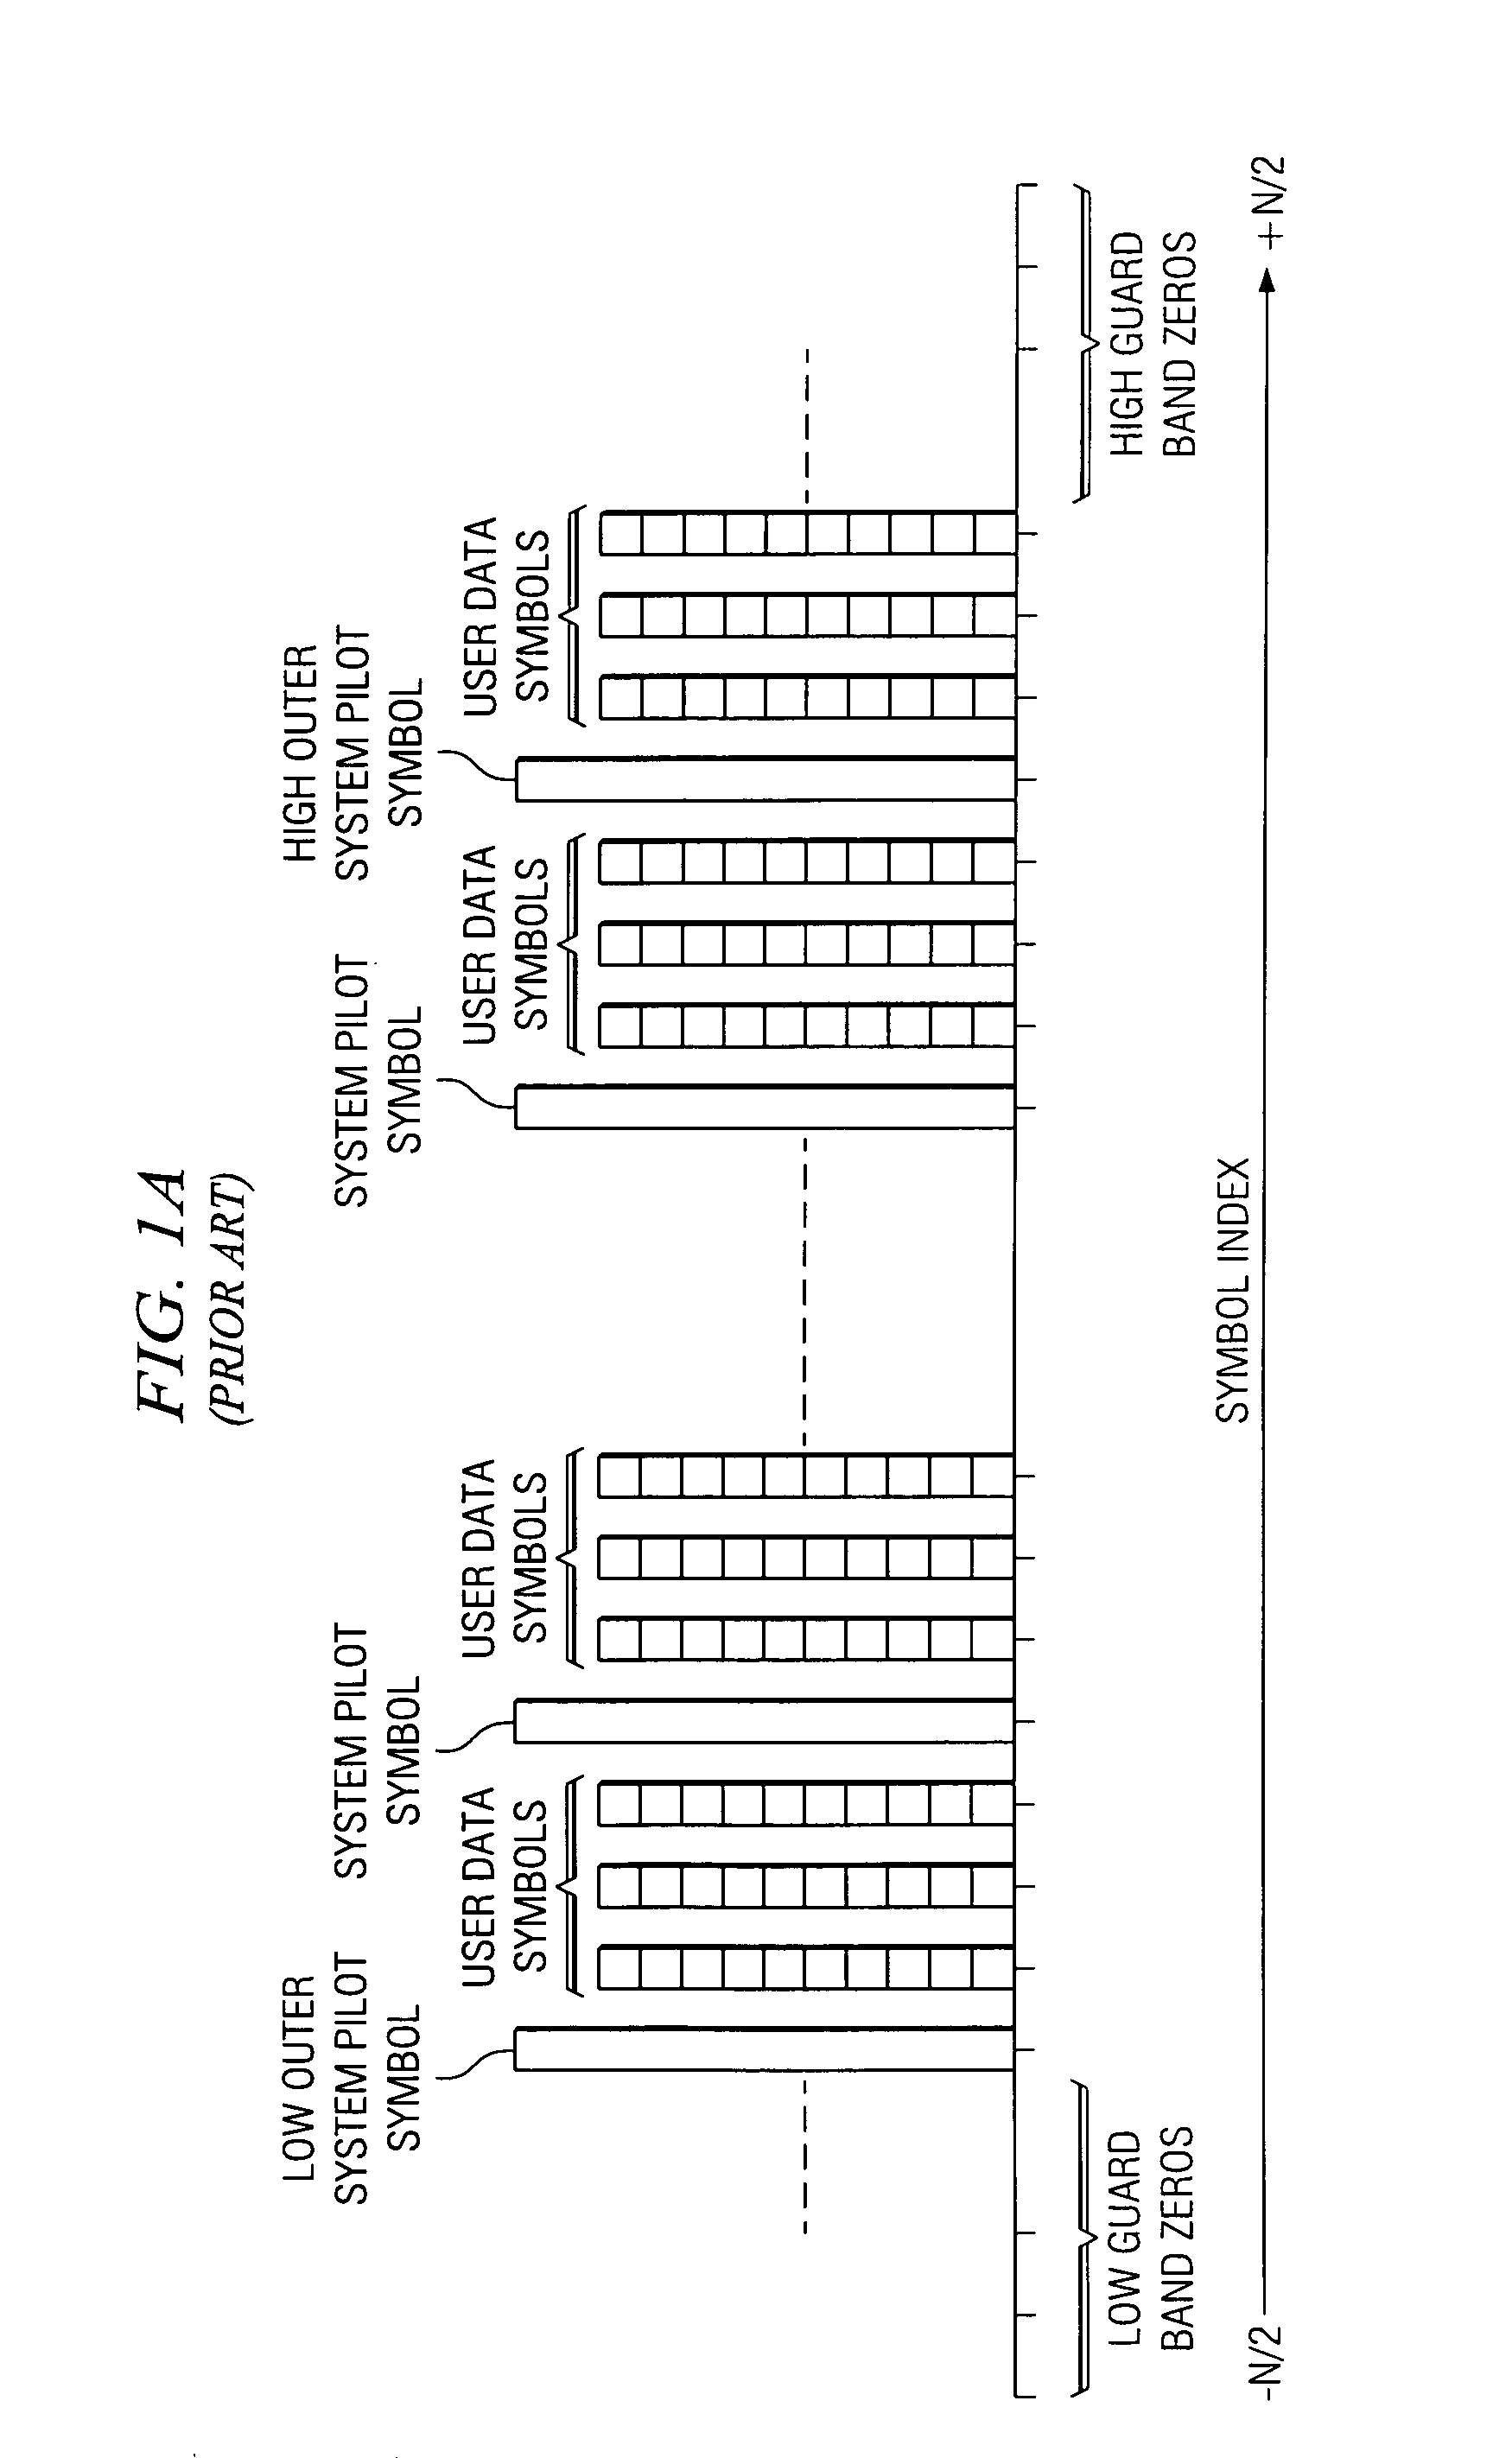 Method and apparatus for multicarrier channel estimation and synchronization using pilot sequences